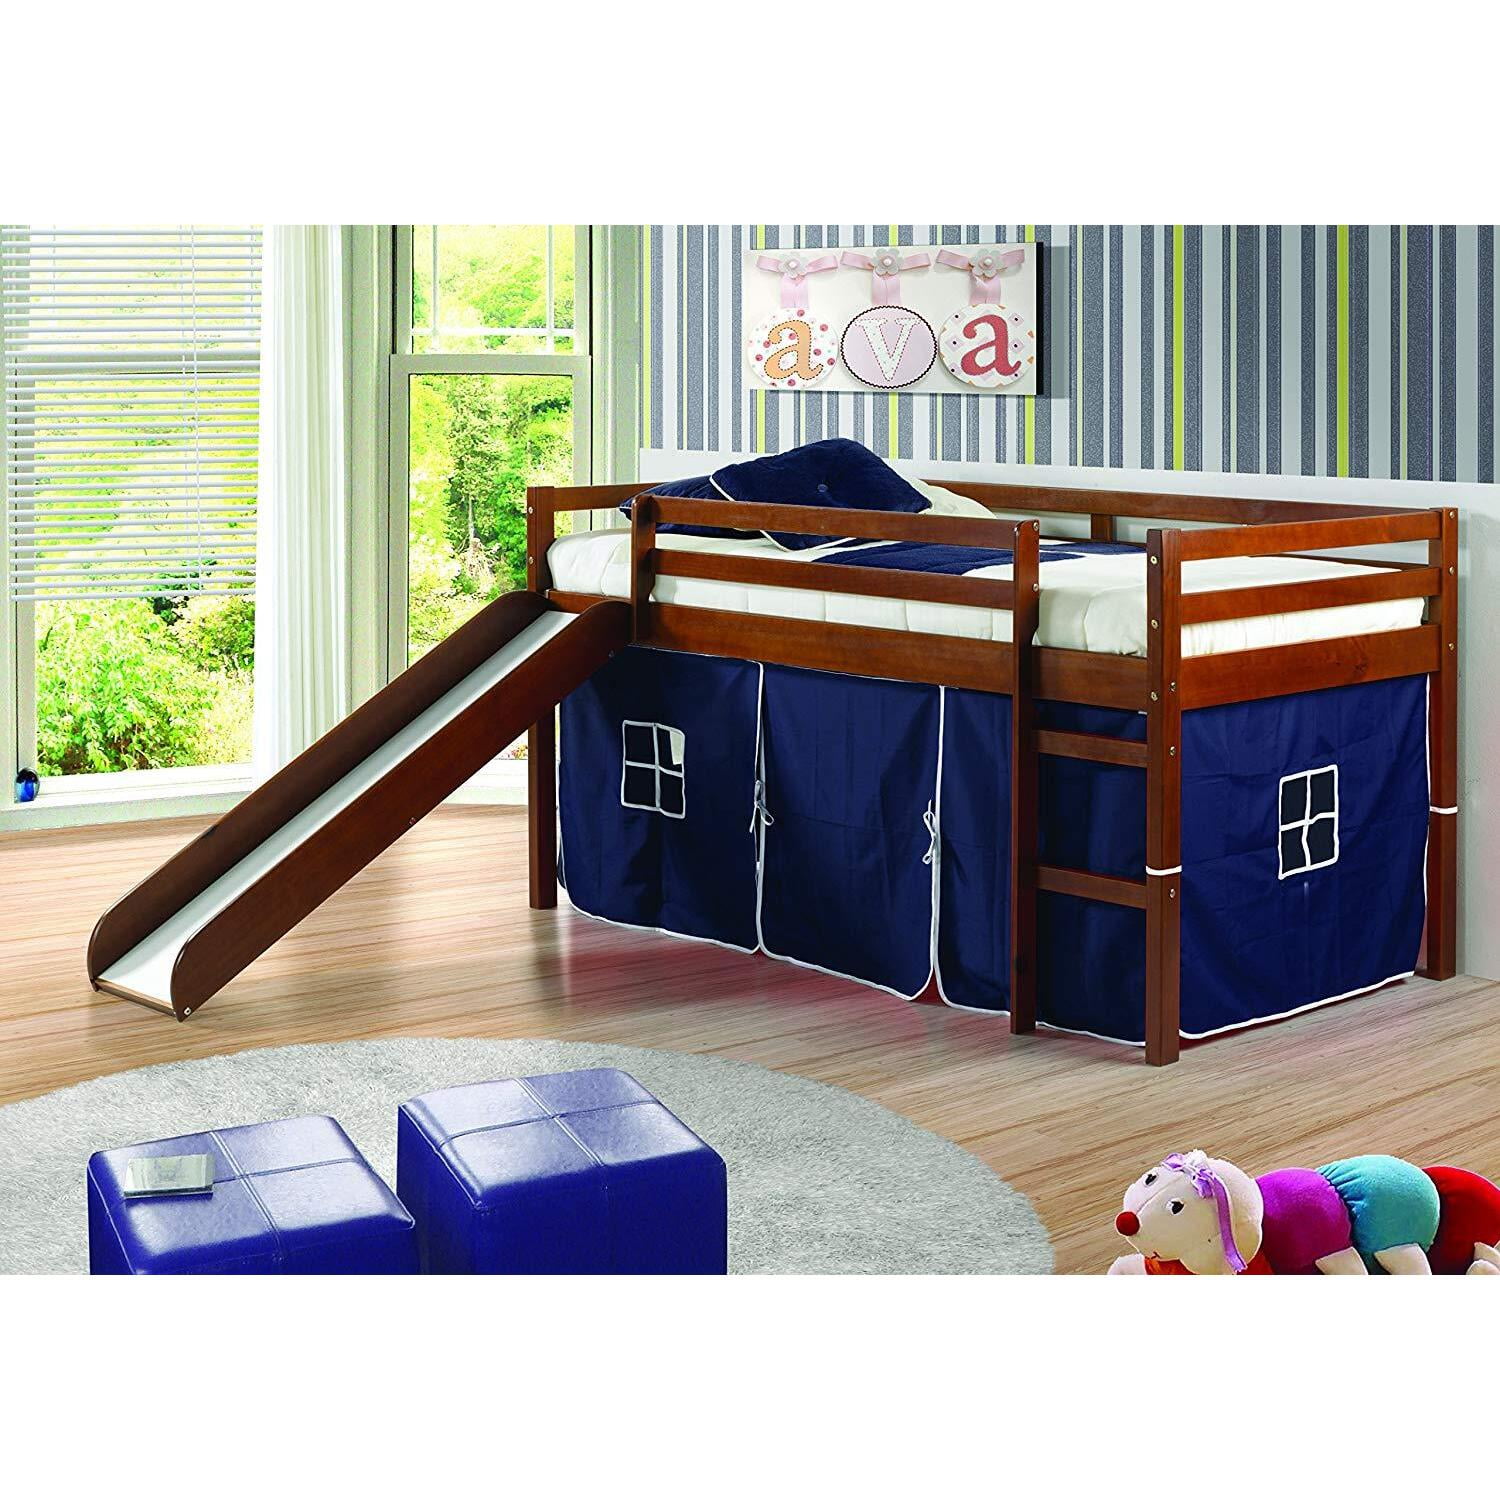 Donco Kids Low Loft Bed With Slide, Basketball Bunk Bed With Slide